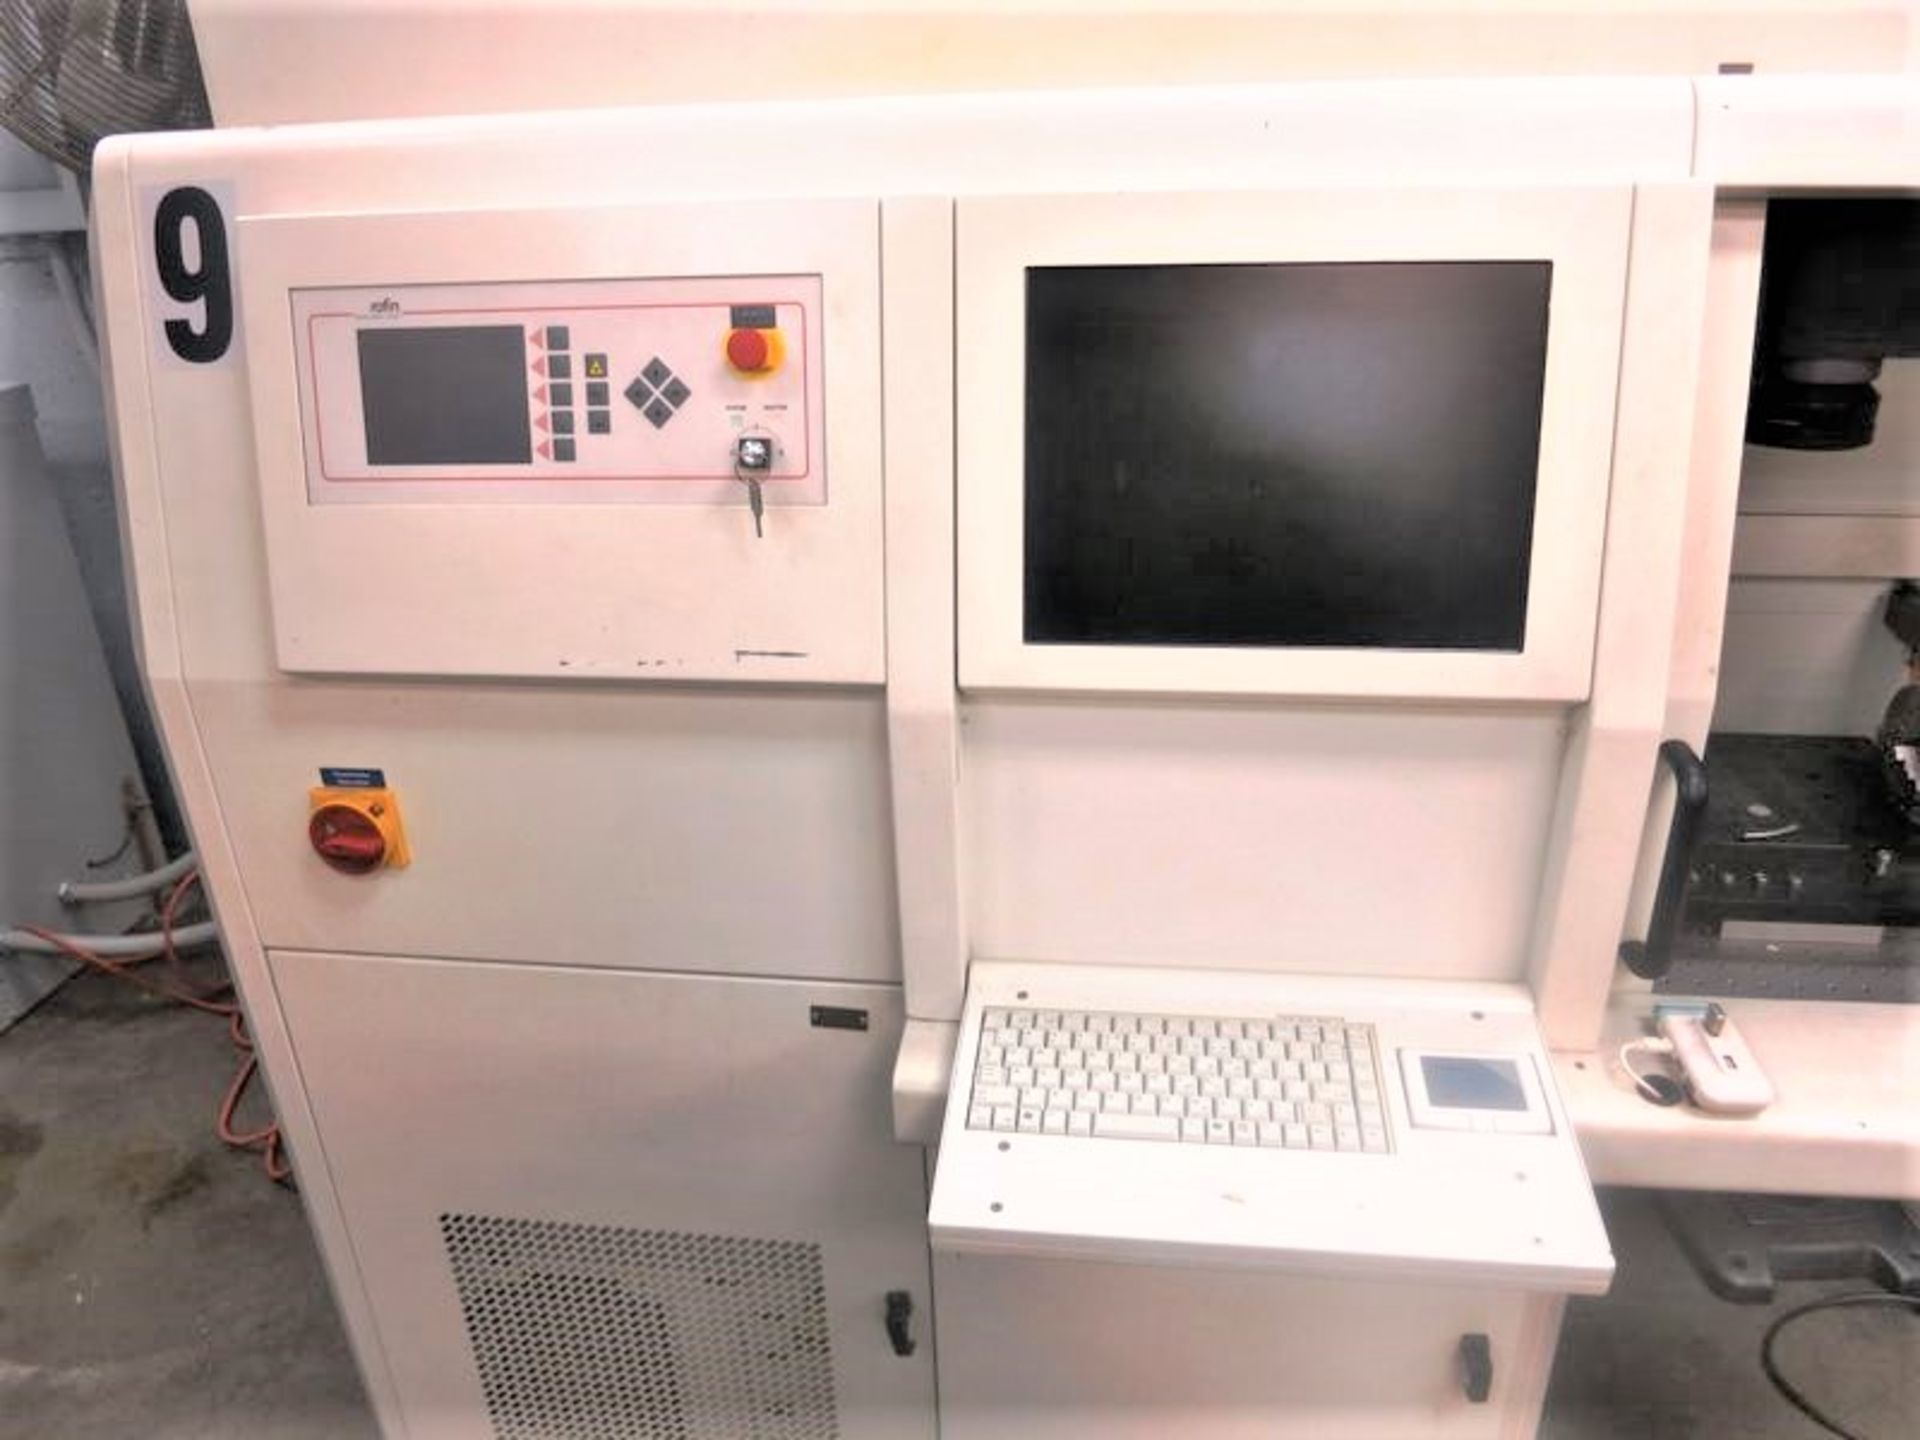 Rofin Starmark SLM 10E Fully Programmable CNC Laser Marking System W/Rotary Table - Image 5 of 13